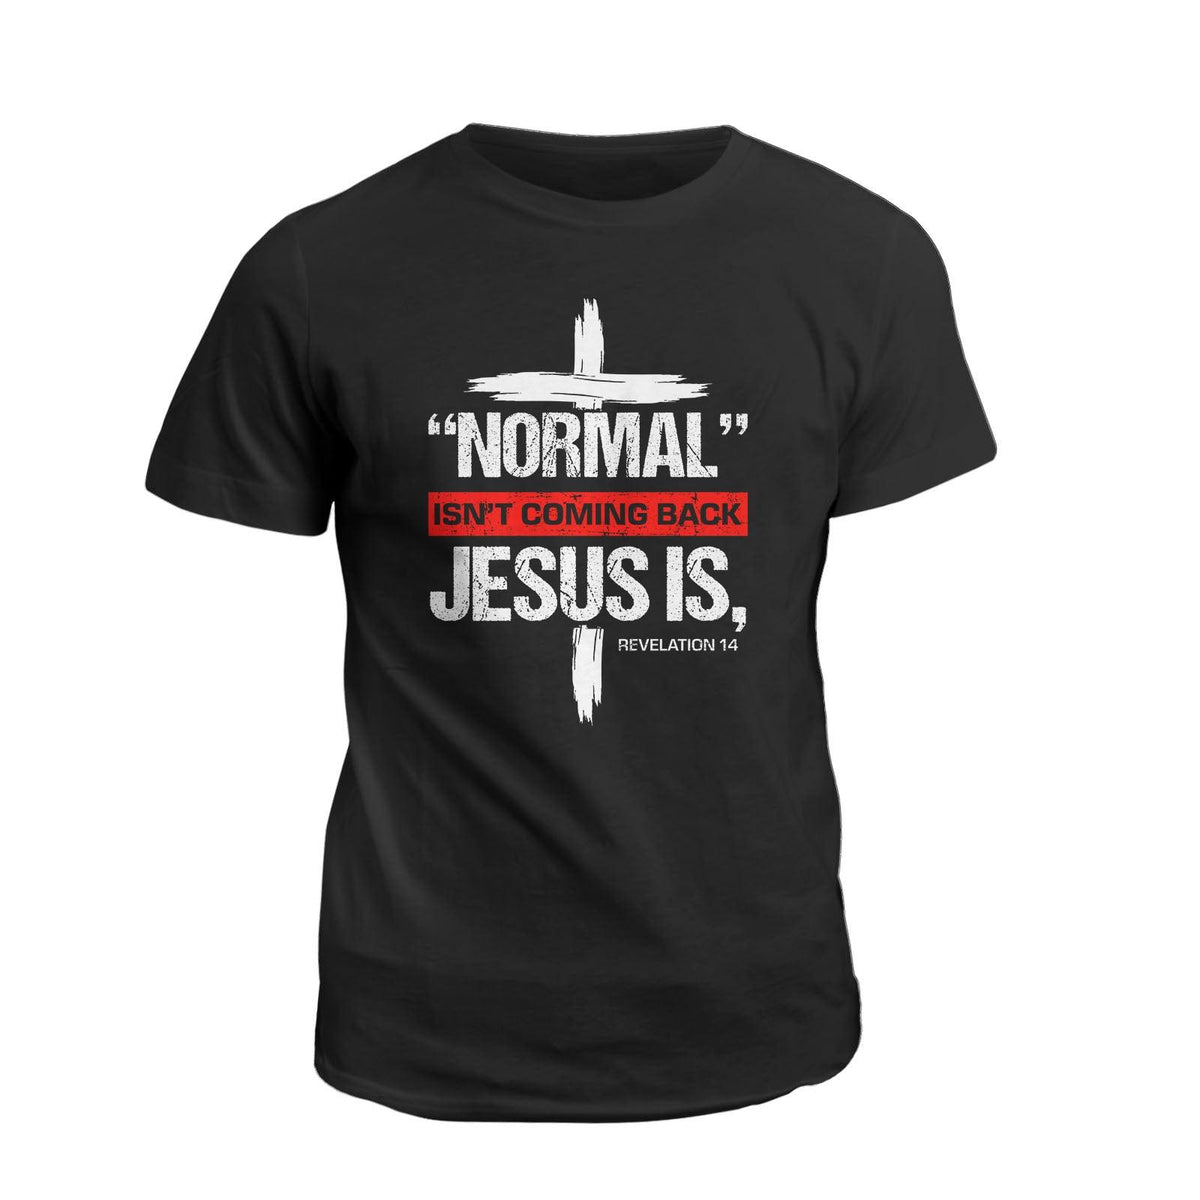 Normal Isn't Comming Back, Jesus Is